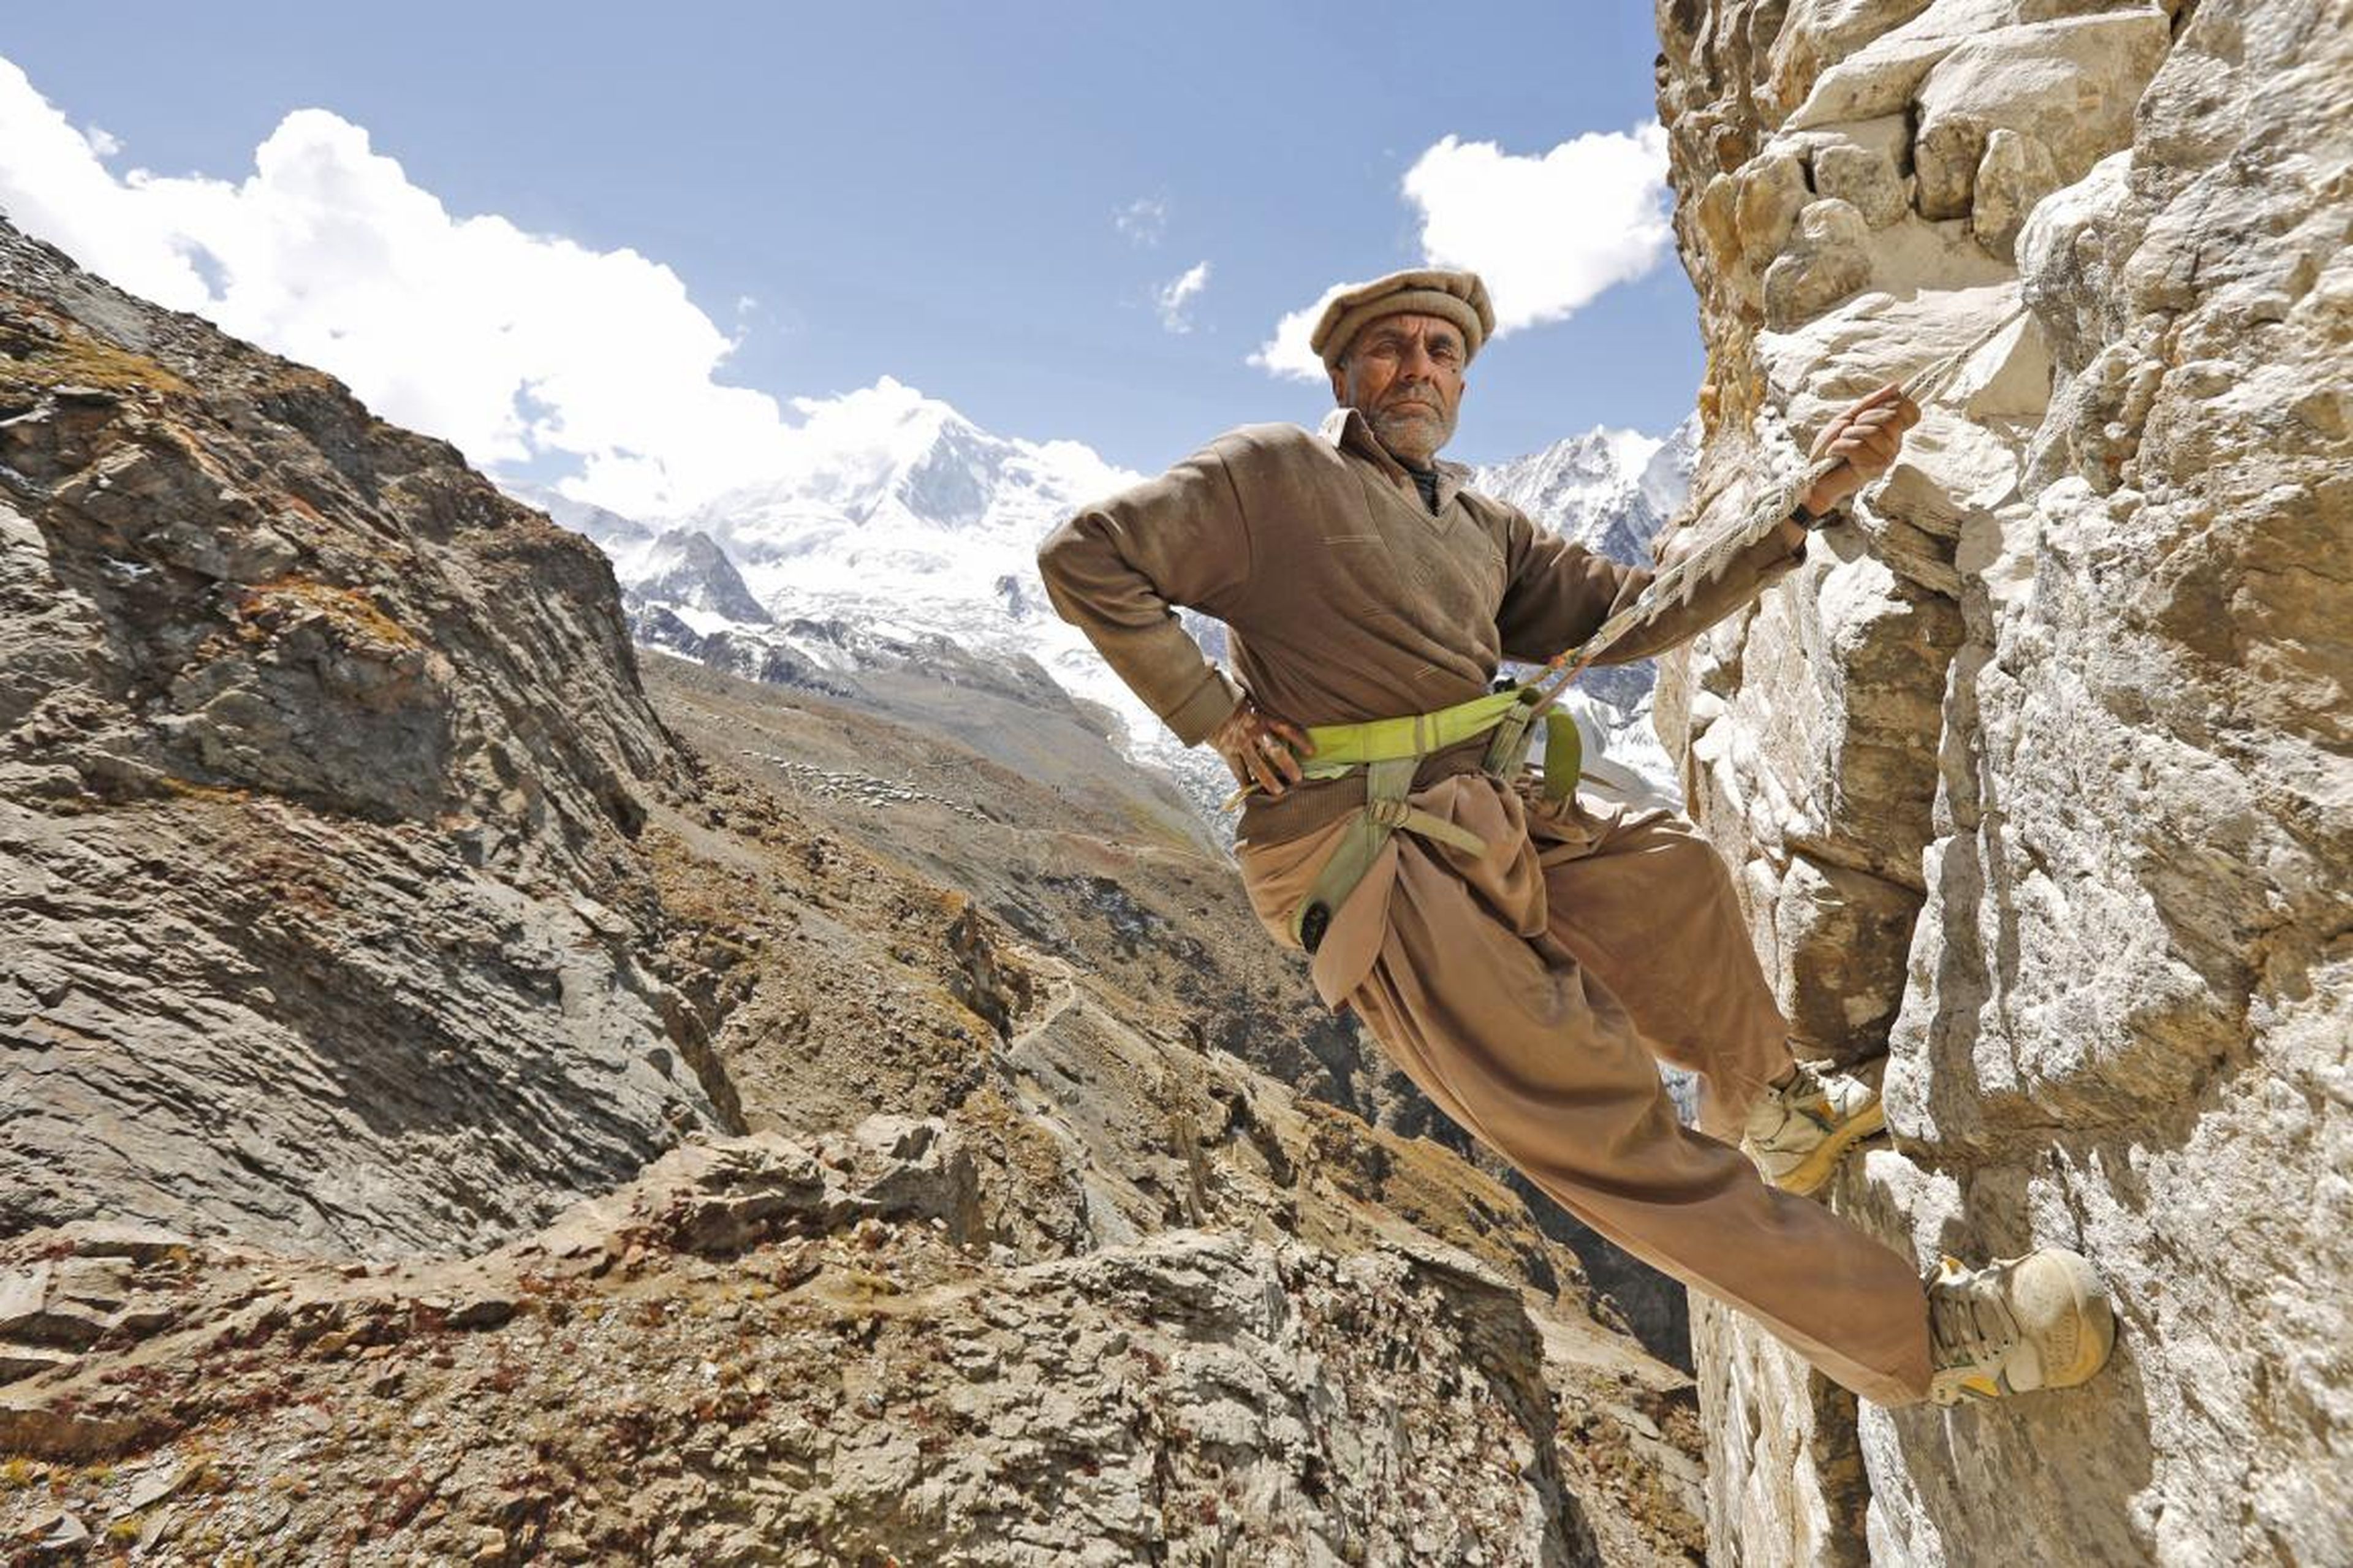 2. In Pakistan’s Karakorum Range, illegal gem miners work at some of the highest levels for miners in the world. This mine, captured in 2015, is located over 16,000 feet above sea level.